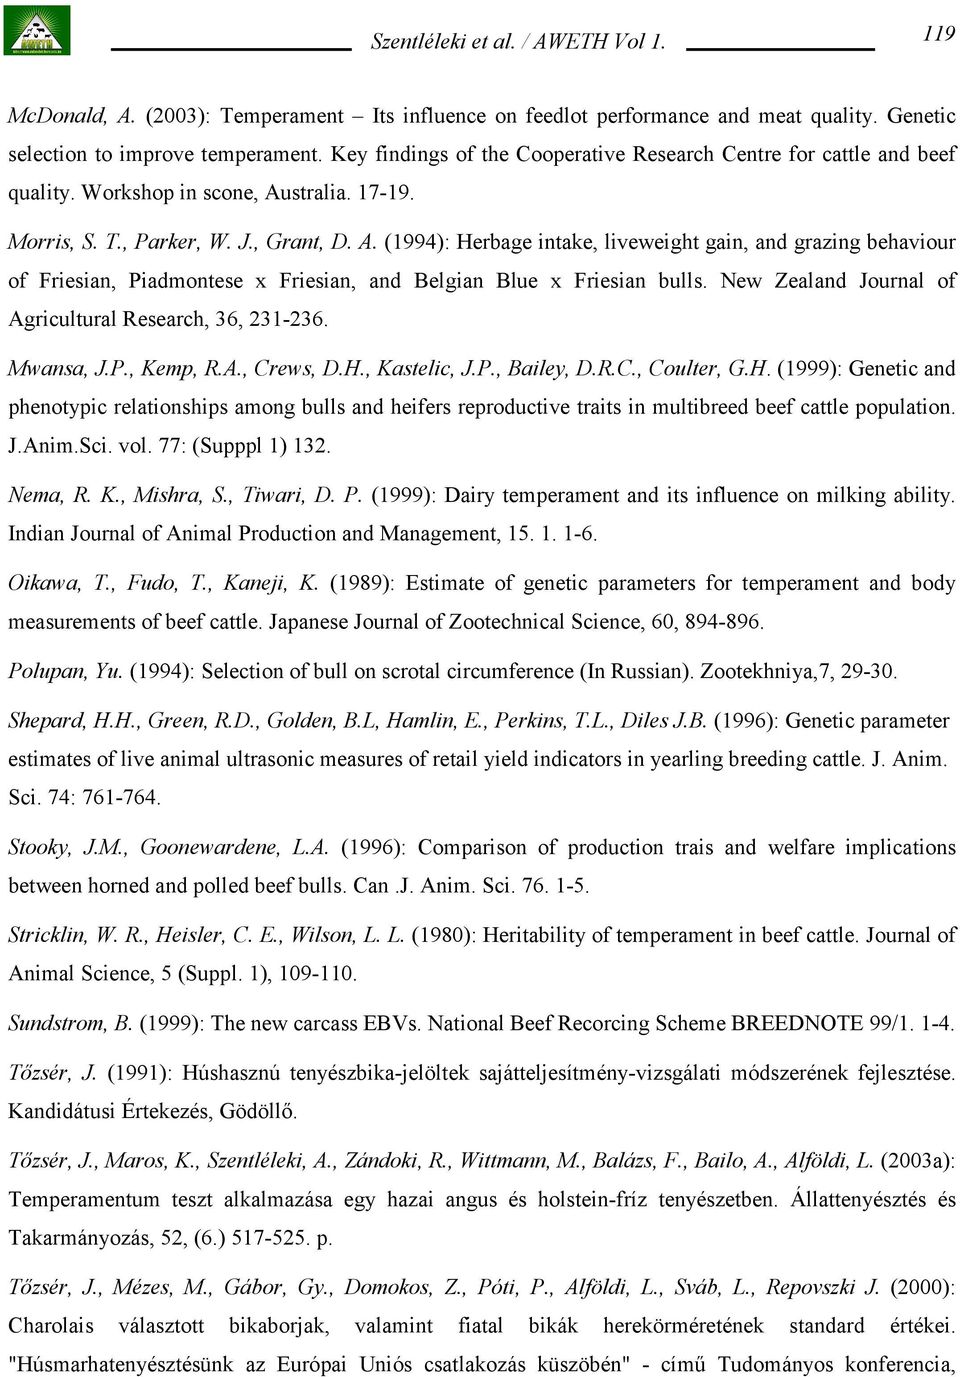 stralia. 17-19. Morris, S. T., Parker, W. J., Grant, D. A. (1994): Herbage intake, liveweight gain, and grazing behaviour of Friesian, Piadmontese x Friesian, and Belgian Blue x Friesian bulls.